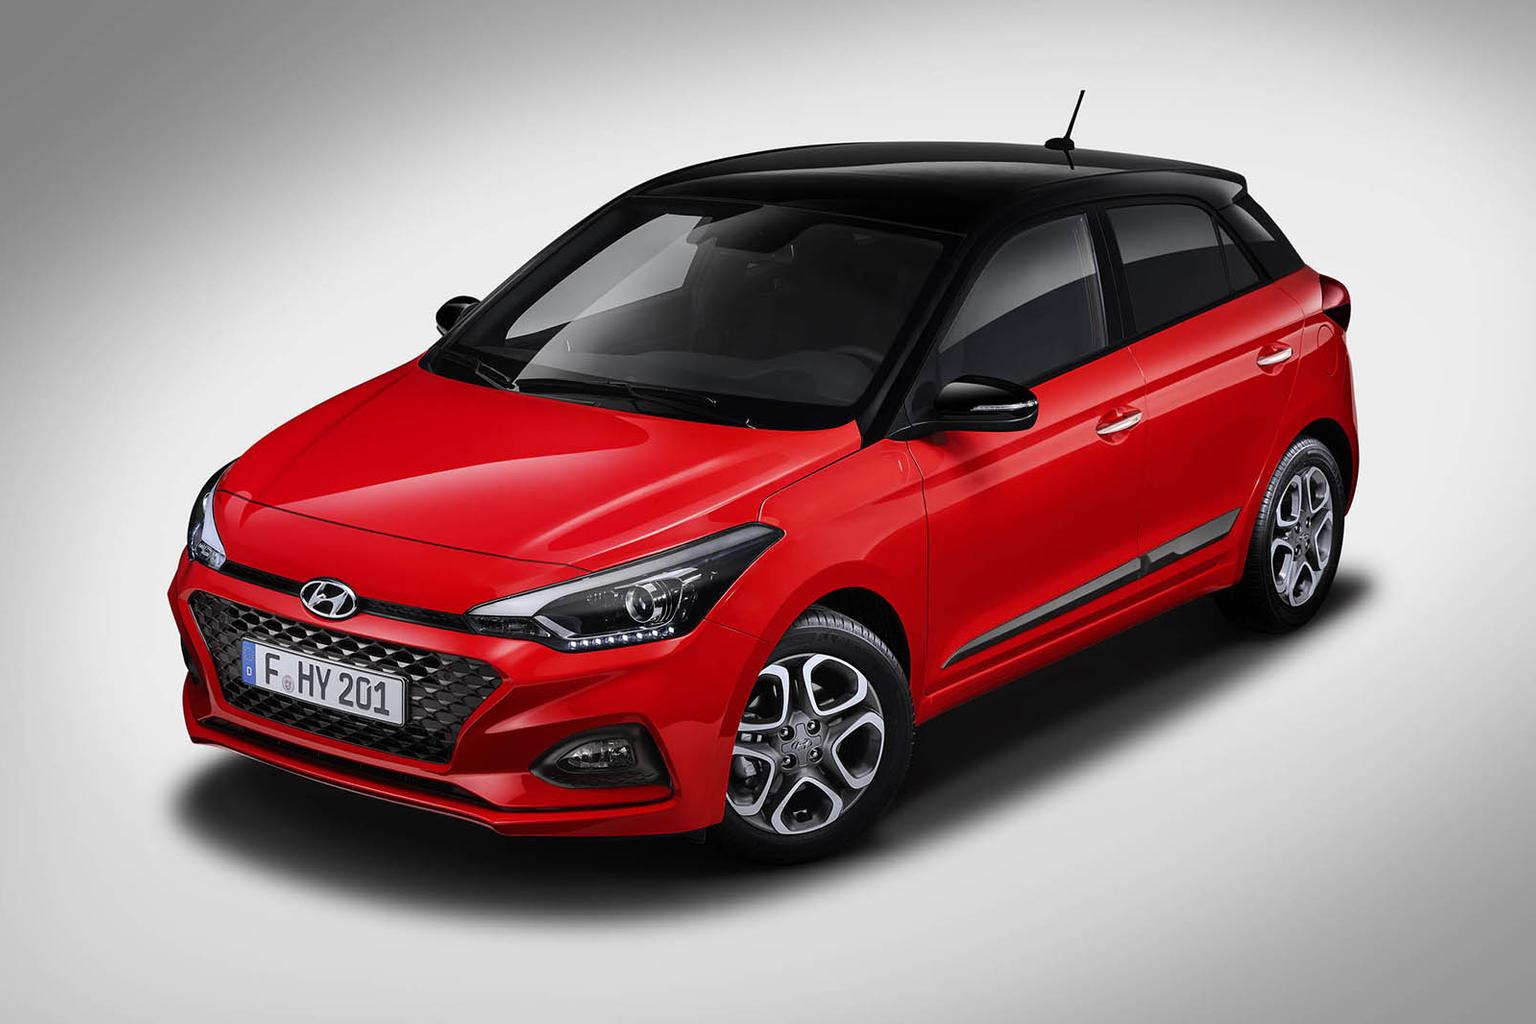 2018 Hyundai i20 price, specs and release date What Car?